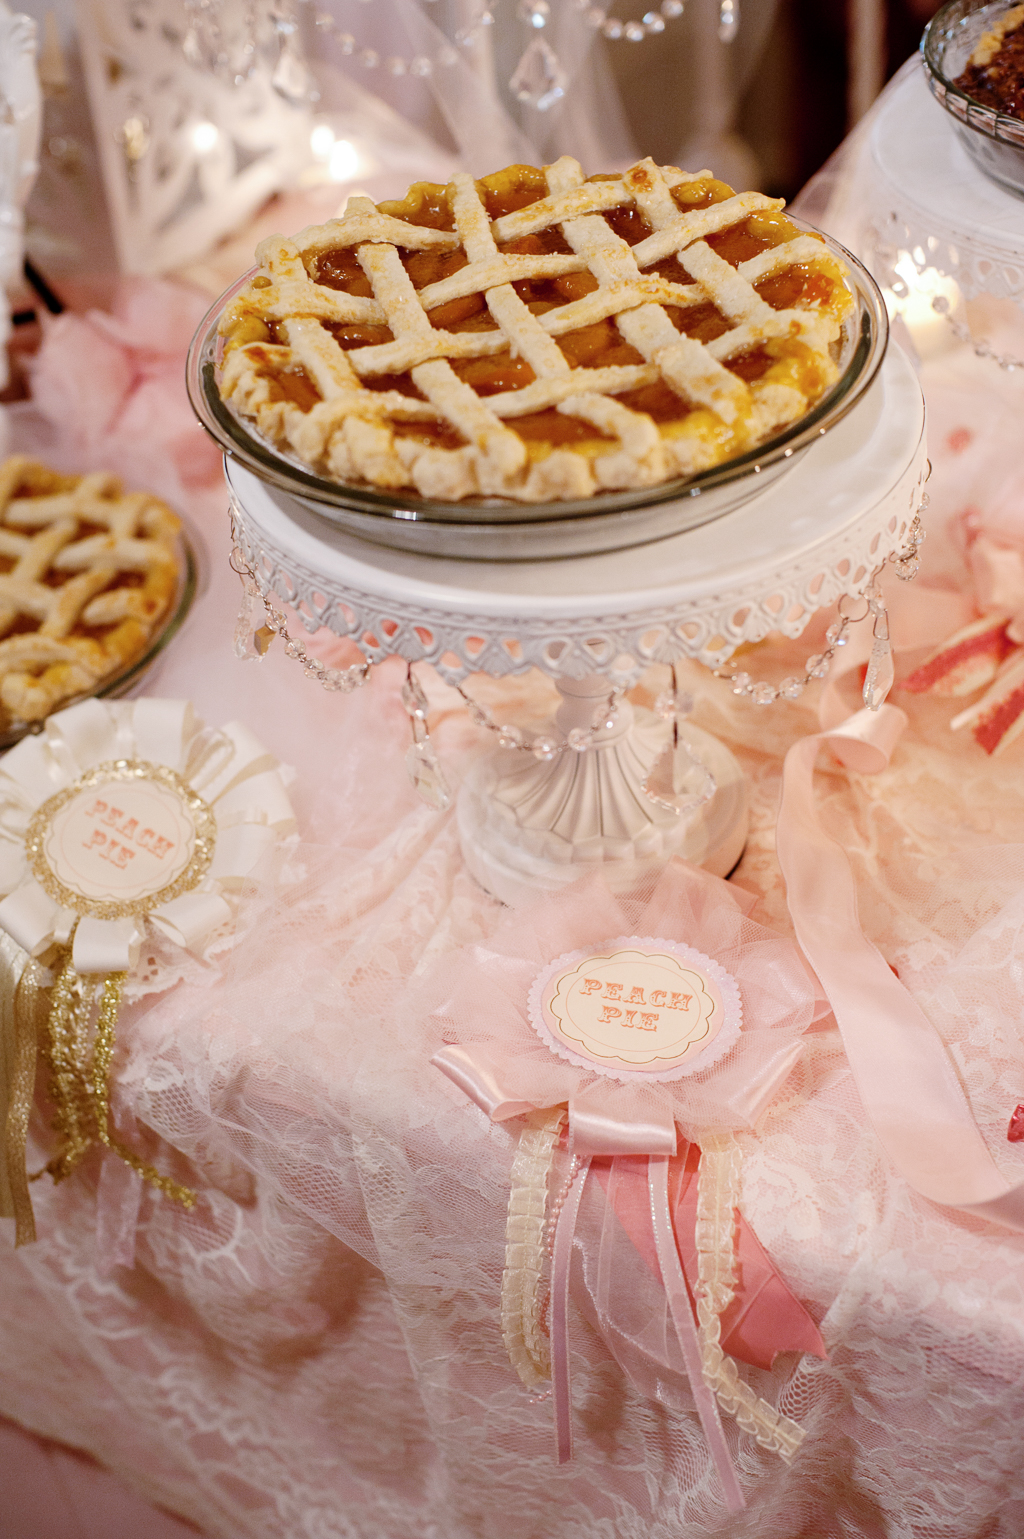 pink and gold award ribbons listing types of pies on a pink and gold covered wedding dessert table